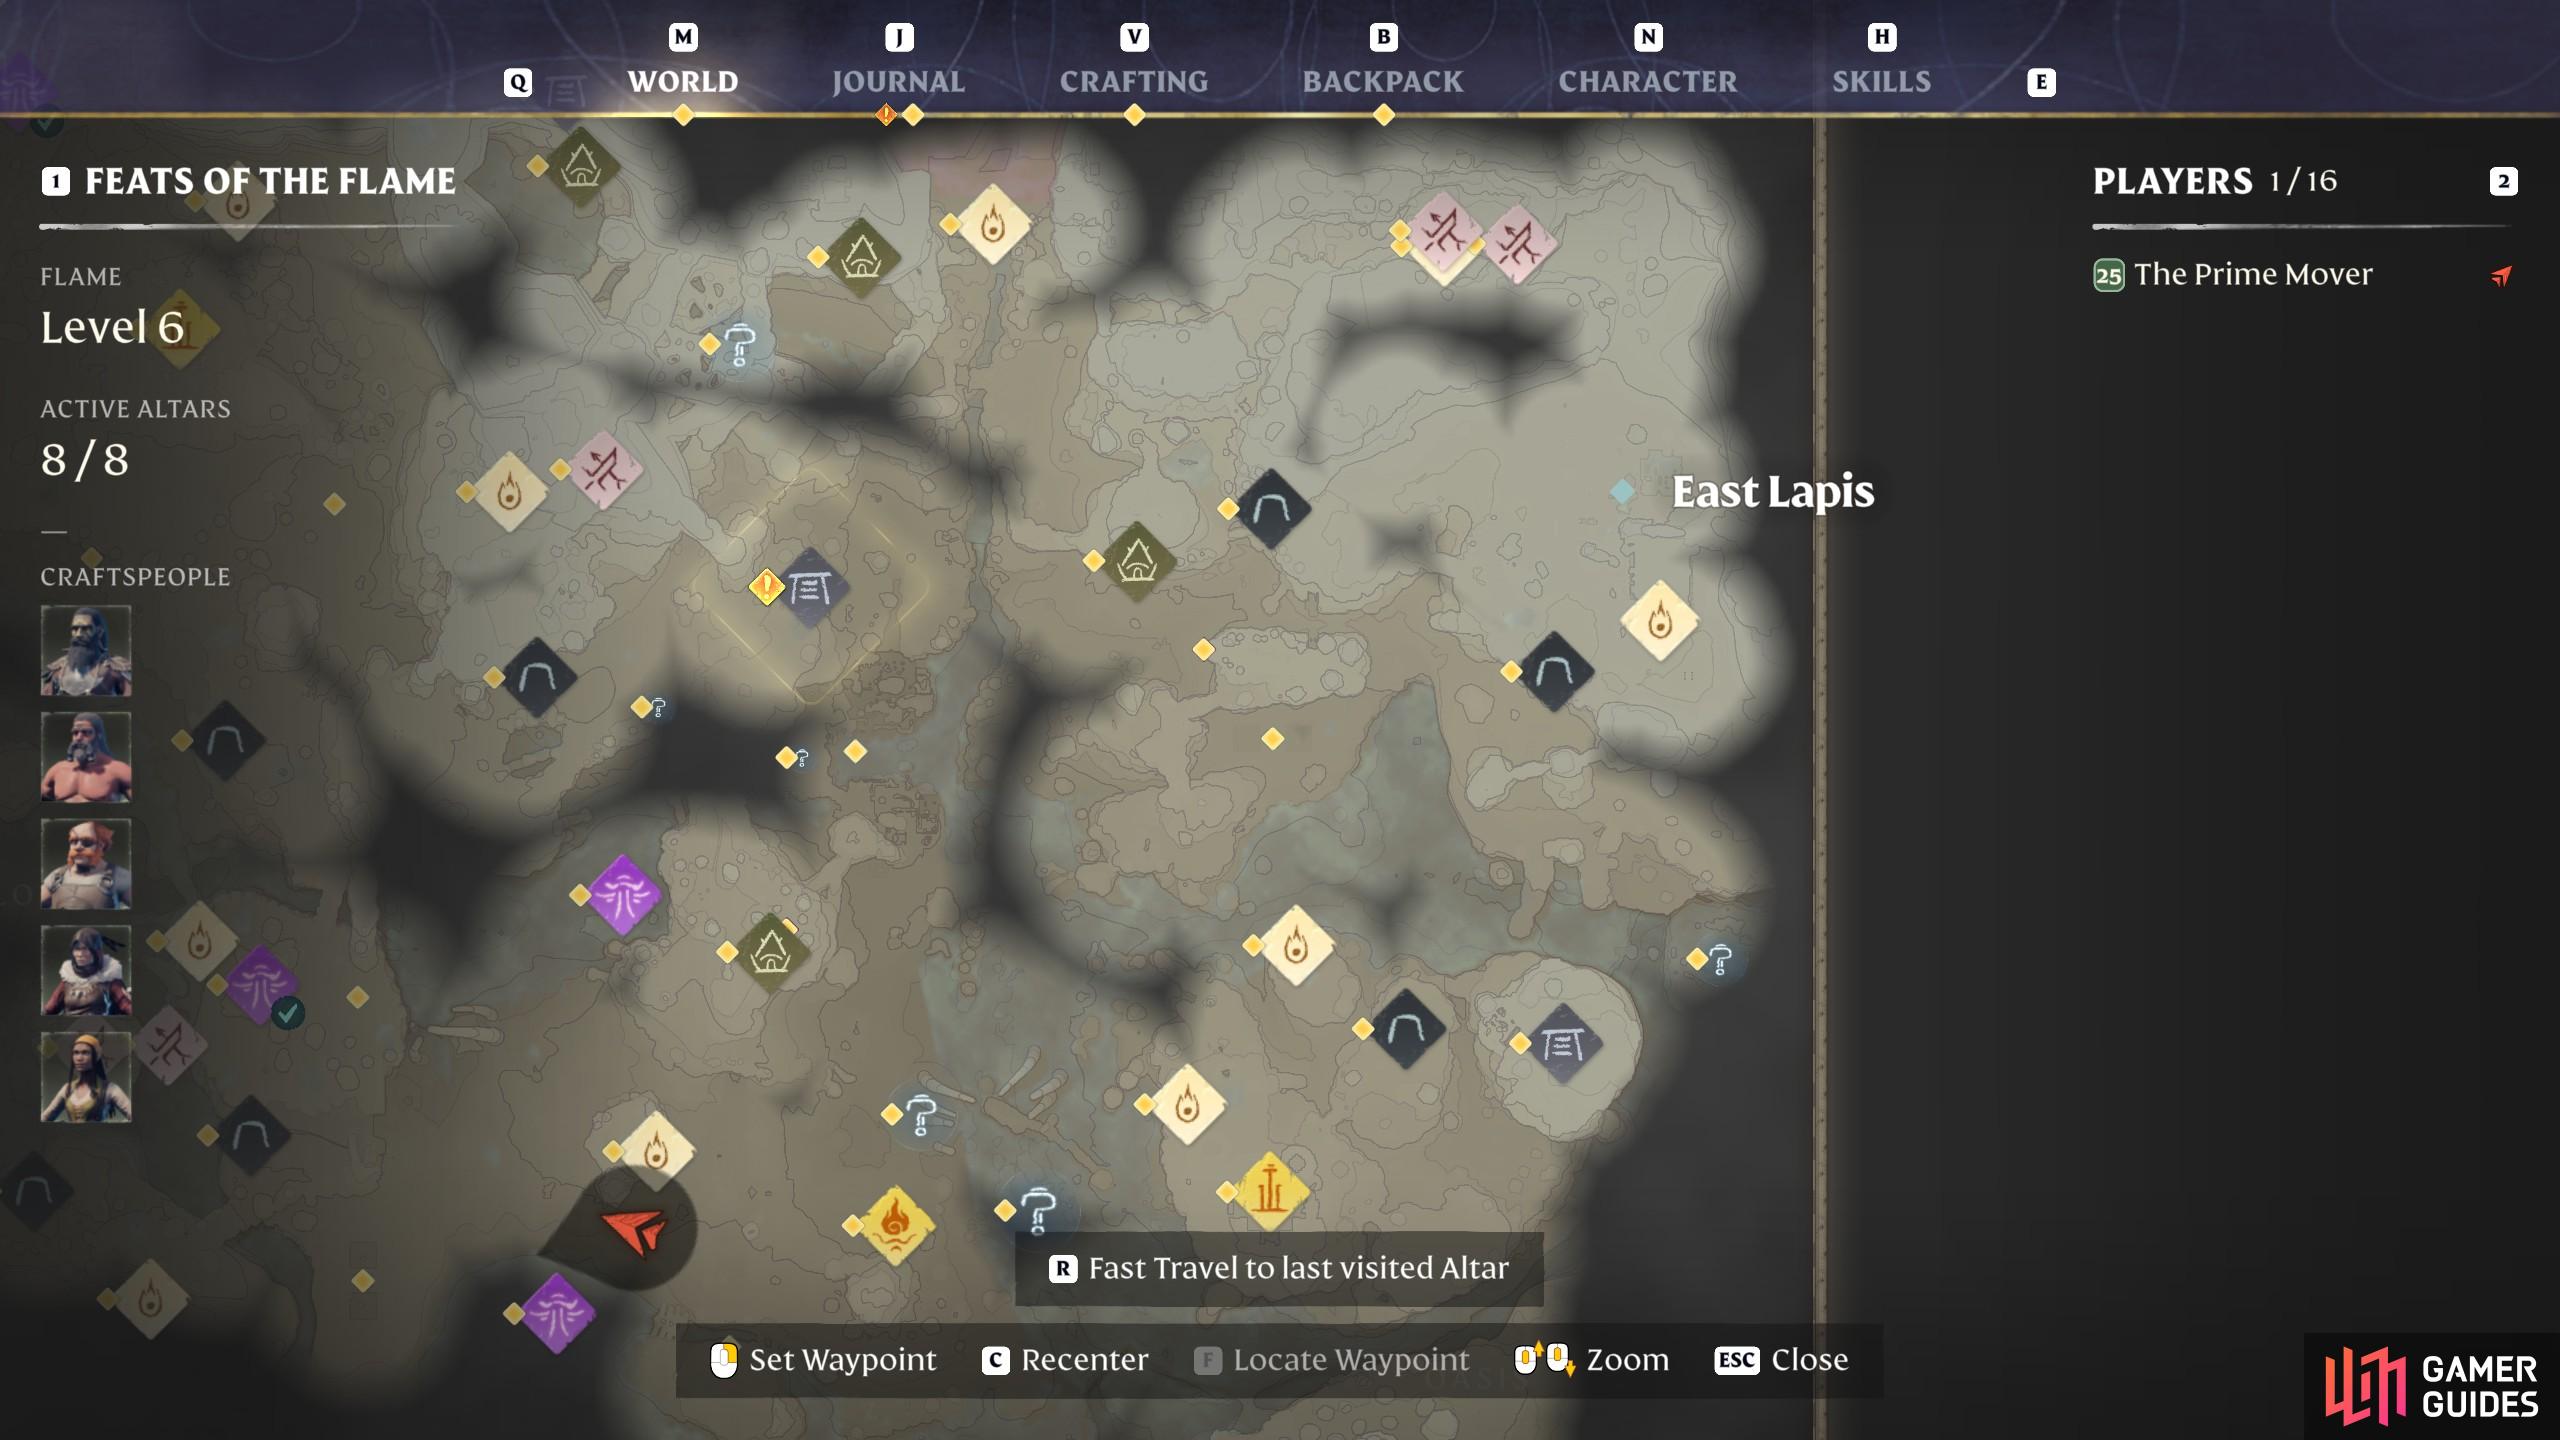 You can find the location of the loom in Enshrouded in East Lapis, in the northeast corner of the map.